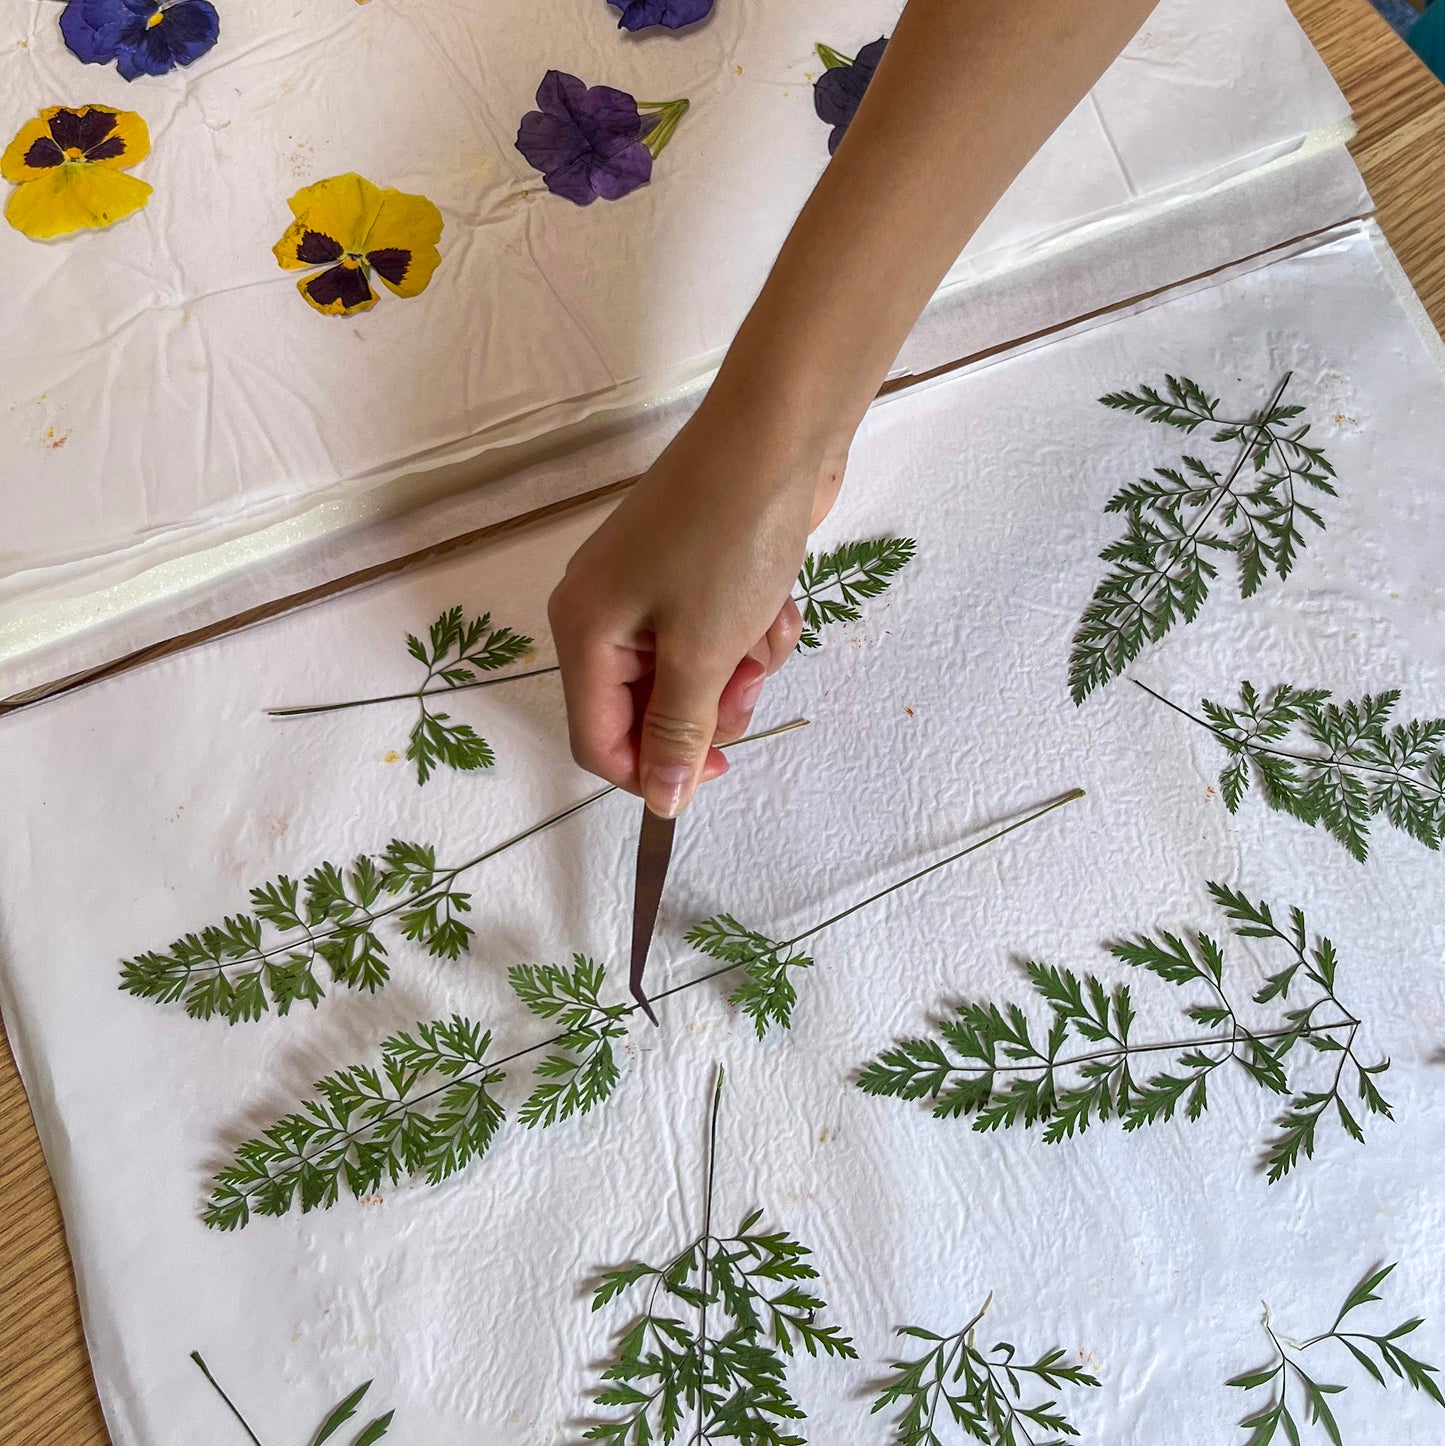 Kids Summer 3-Day Workshop | Eco-Printing and Handmade Paper | Age 8-14 | August 6th-8th | 9:30am - 12pm